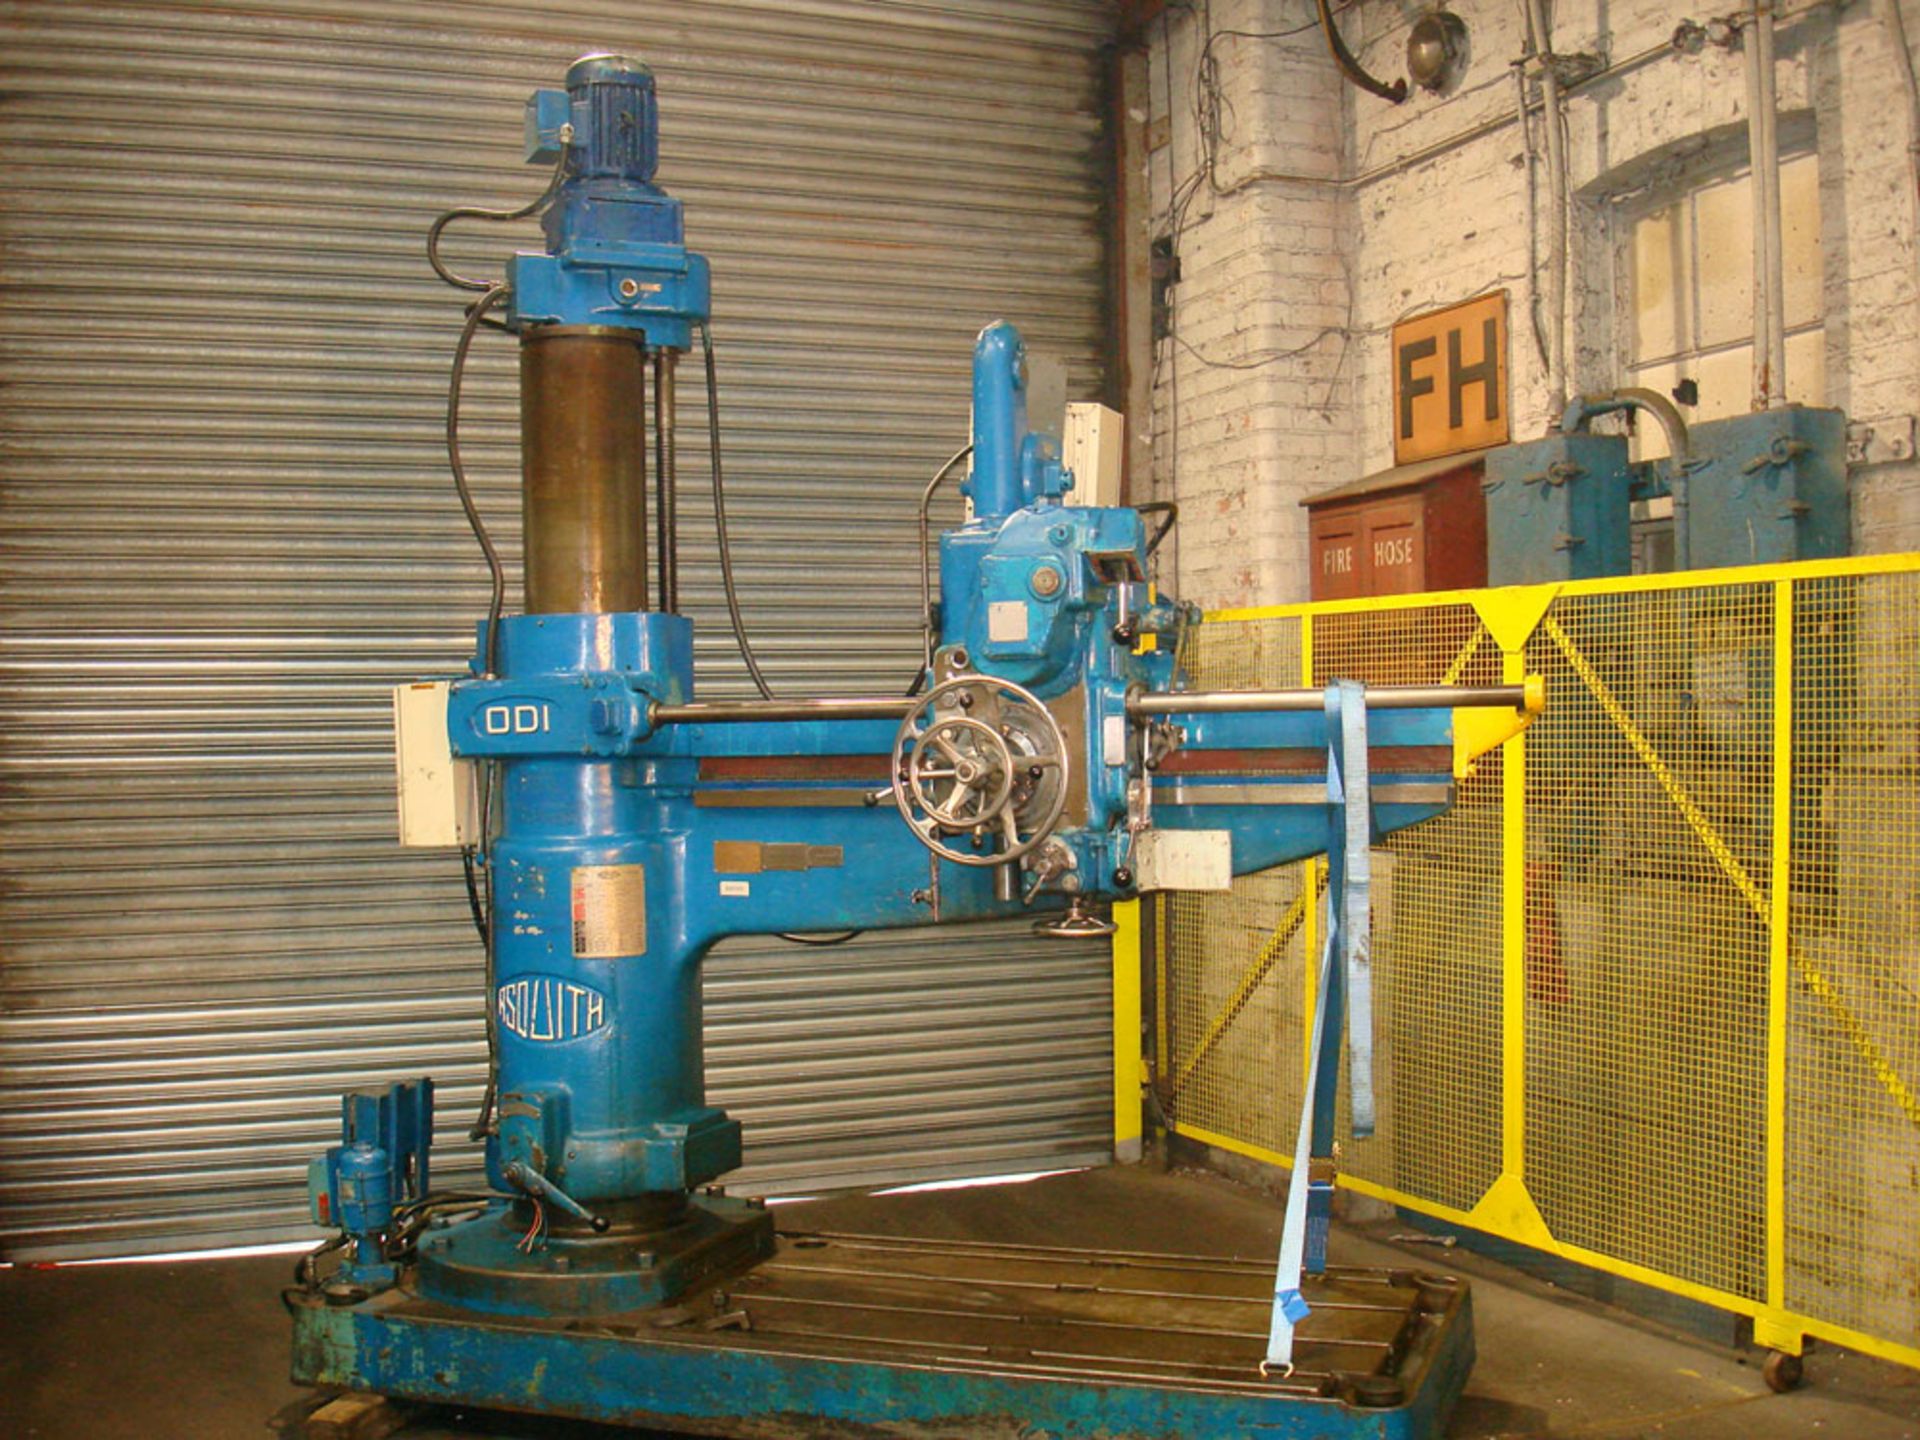 Asquith OD1 6ft Radial Arm Drill. Arm lenght 6ft. Spindle 5 Morse Taper. Speeds 8-800rpm. Box Table.